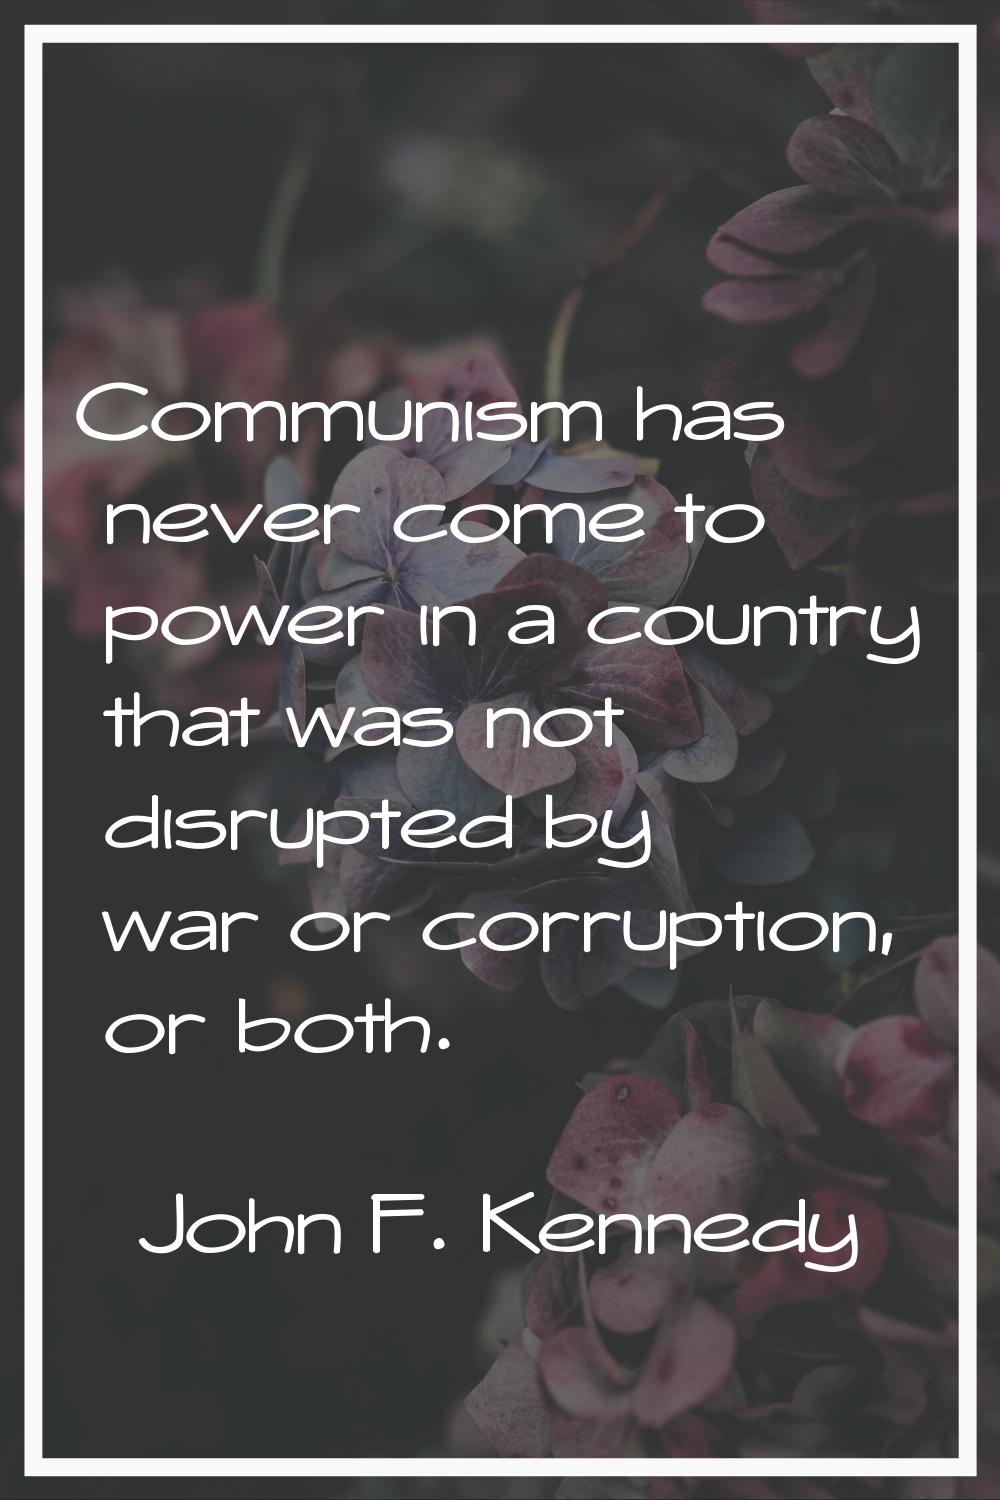 Communism has never come to power in a country that was not disrupted by war or corruption, or both